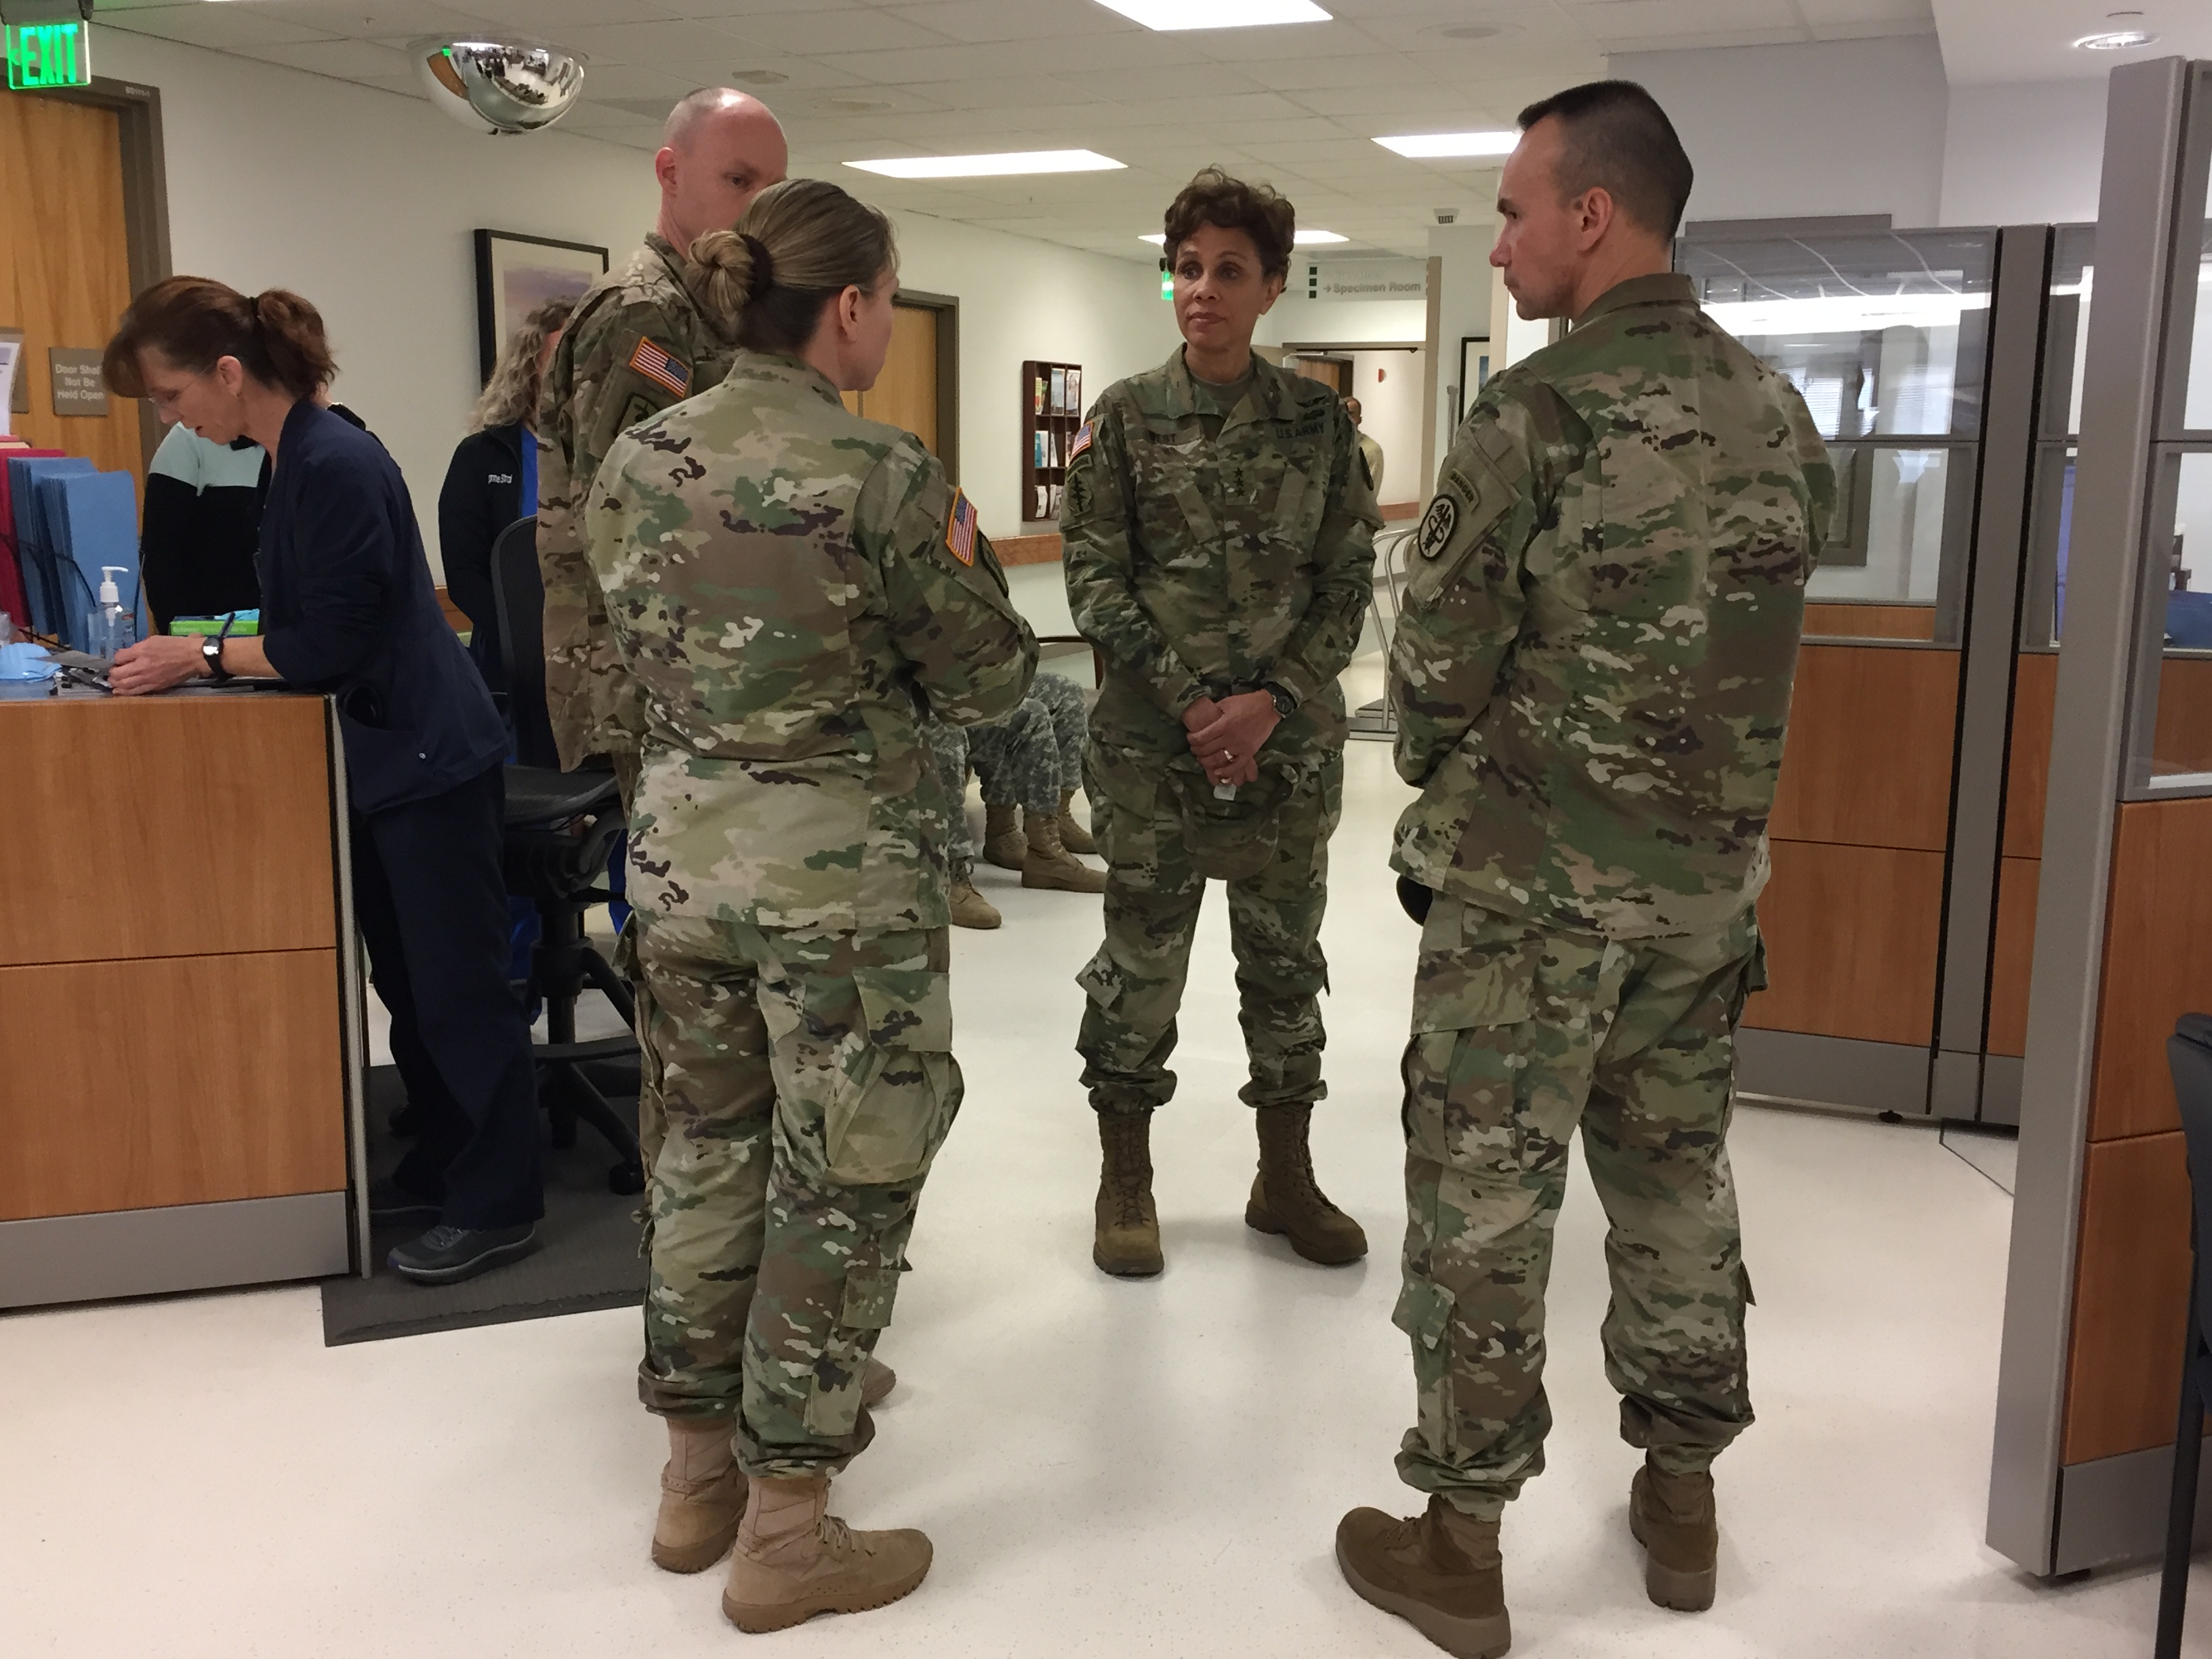 Soldiers From Fort Bragg Fly To St. Thomas To Give Medical Assistance Following The Devastation of Hurricane Irma